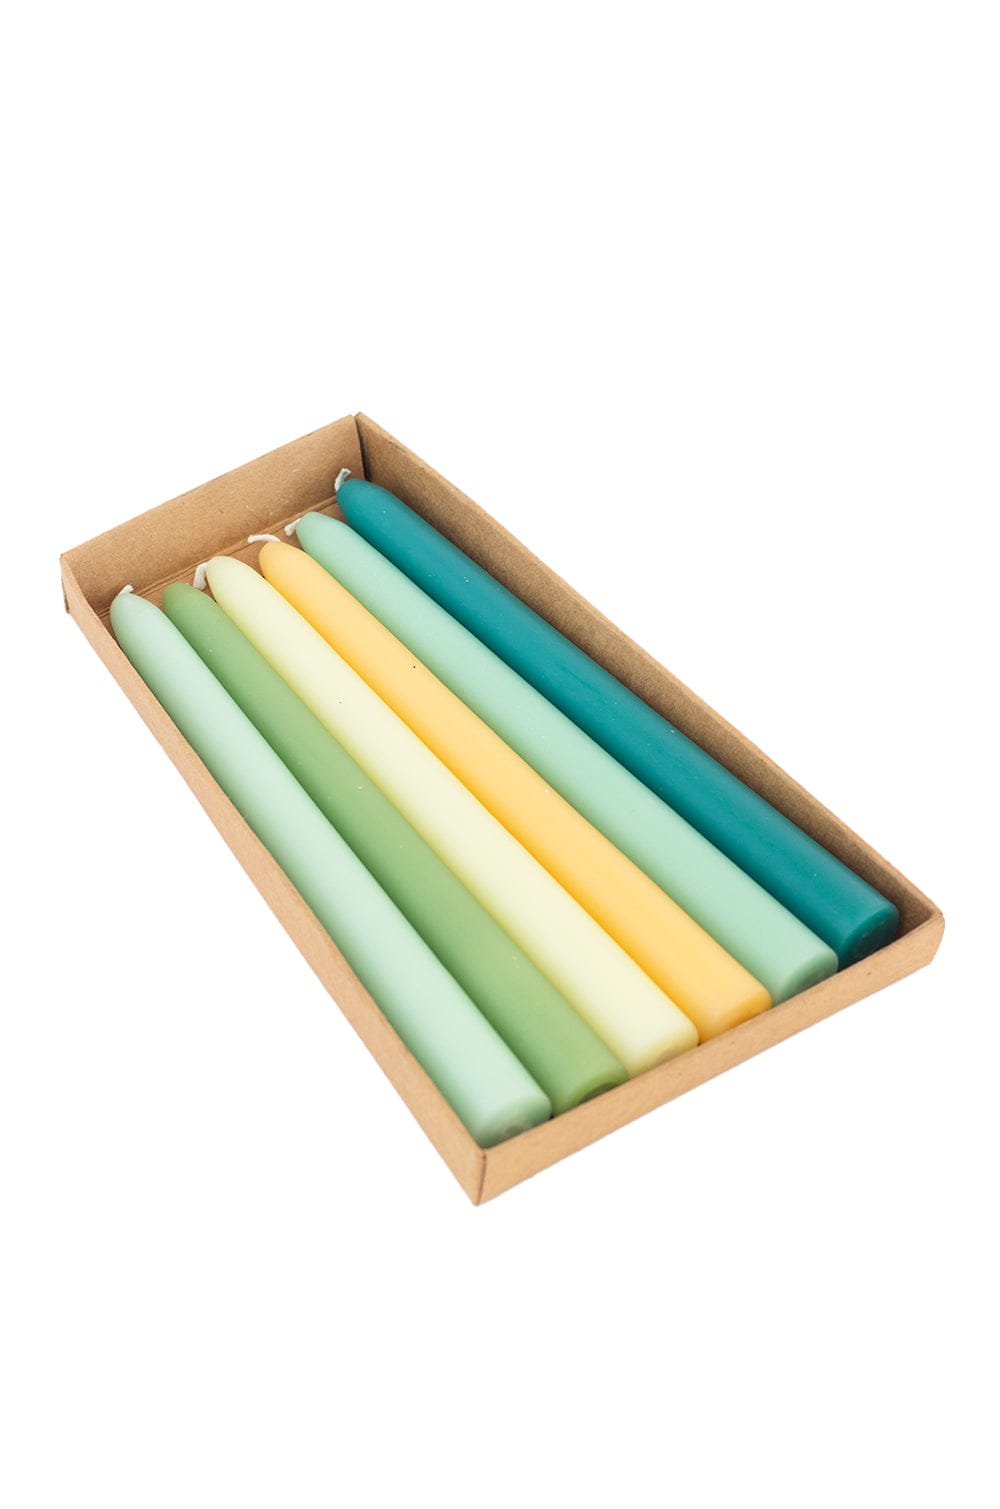 Verde Ombre Tapered Candles - set of 6